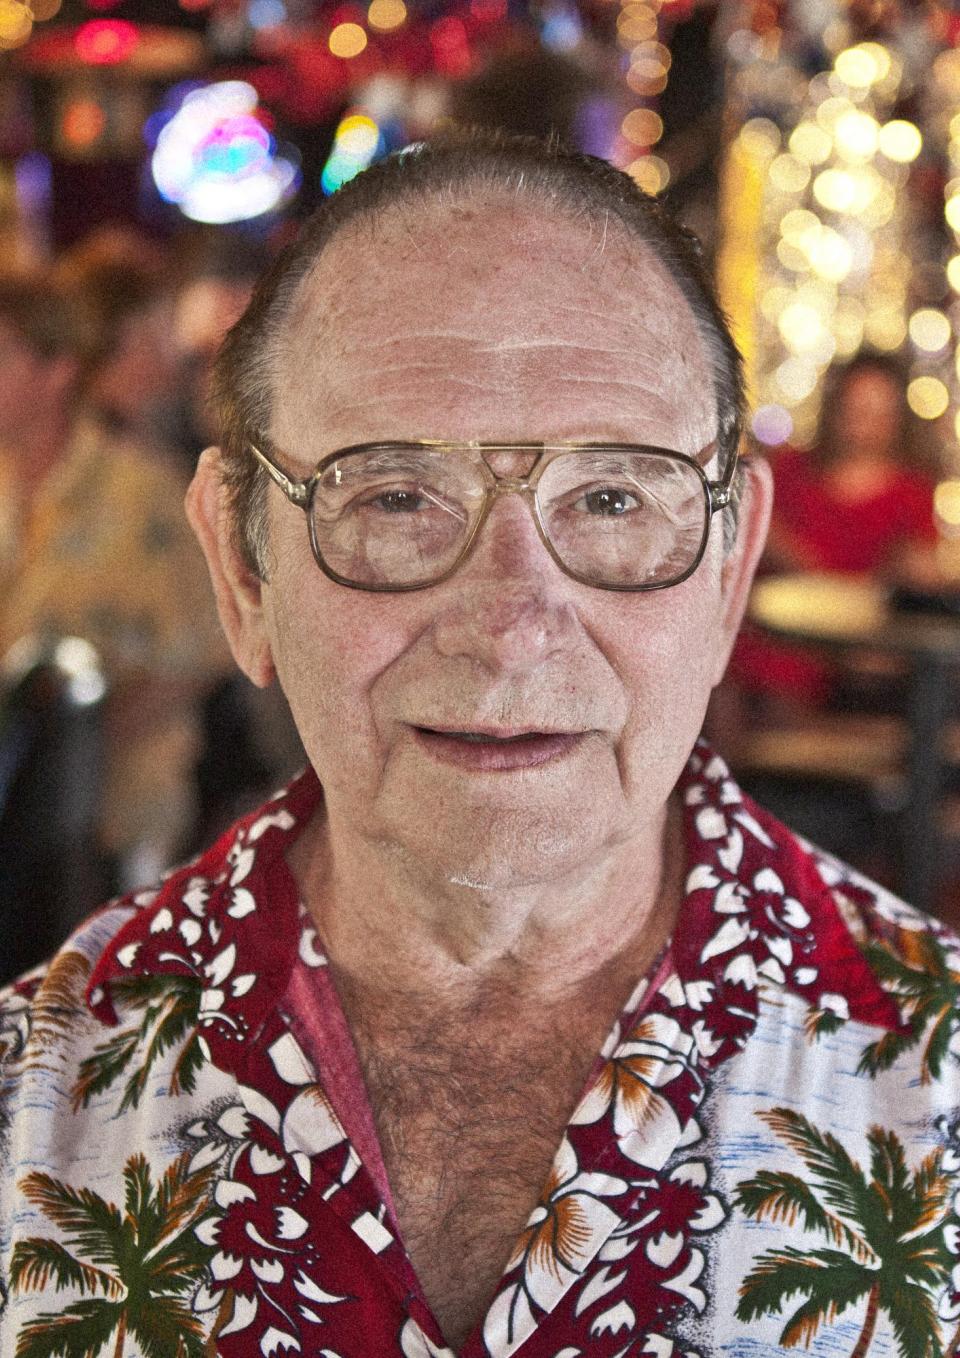 A still from the New Day Film Before You Know It. An balding, elderly man with glasses and a brightly patterned button down shirt looks into the camera with an amused grin. People and bright colored lights fill the blurred background.